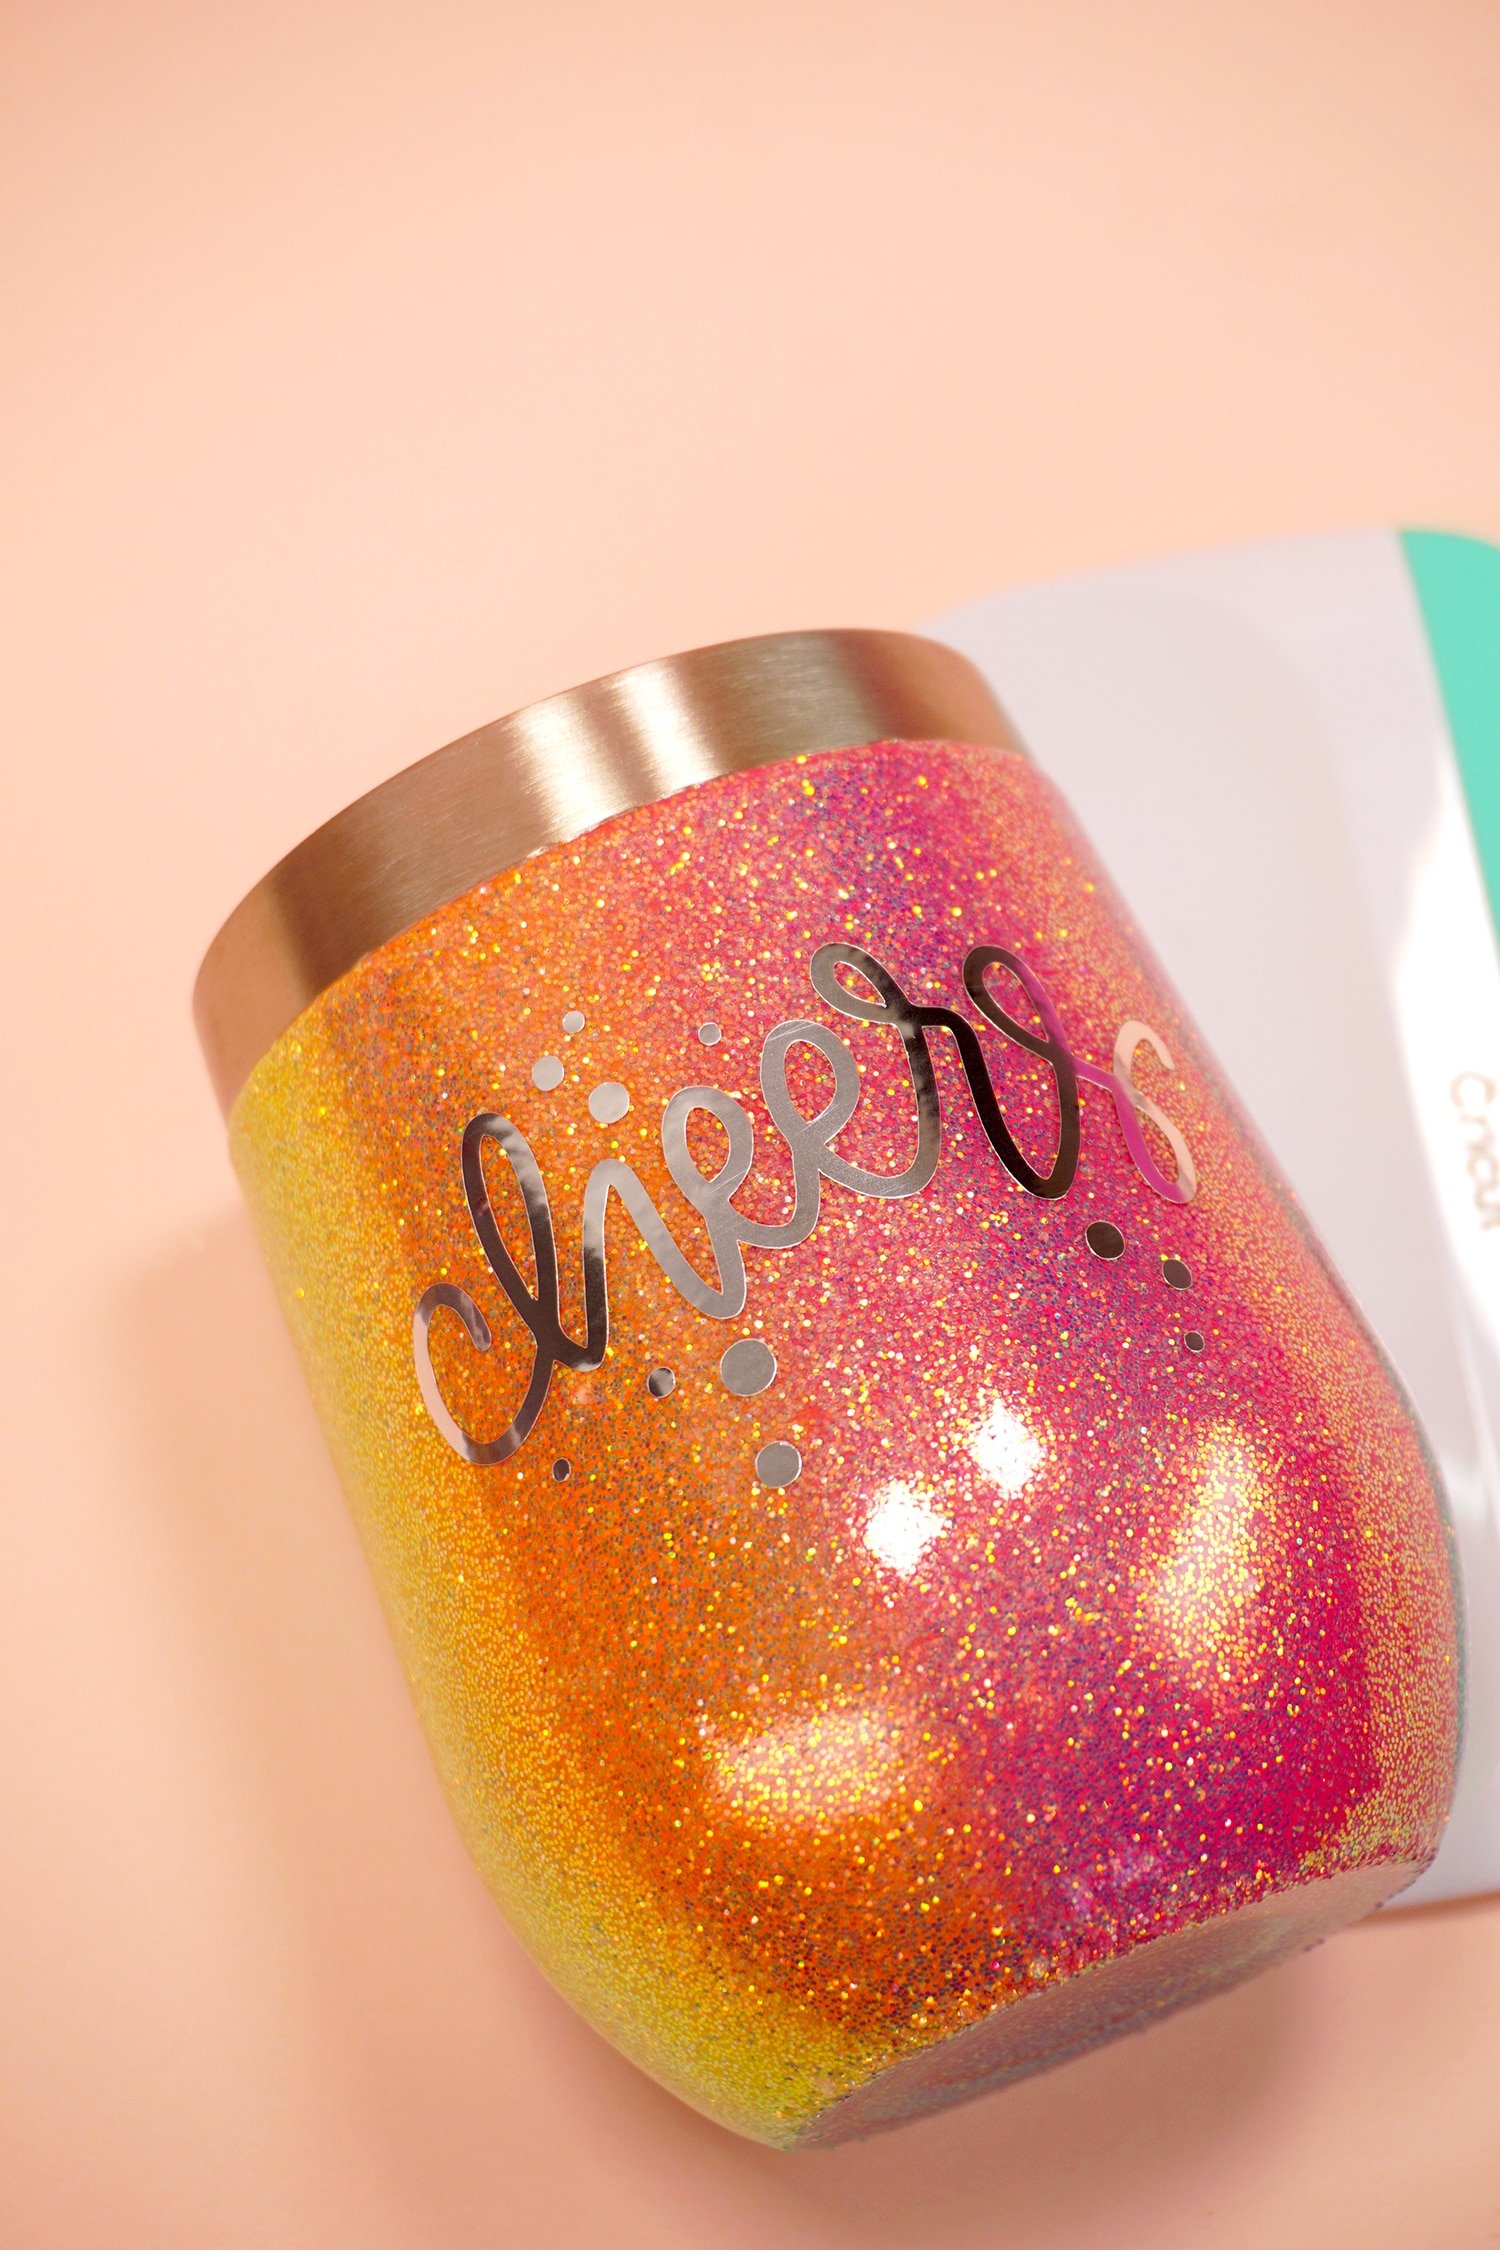 revealed cheers svg file on finished tumbler